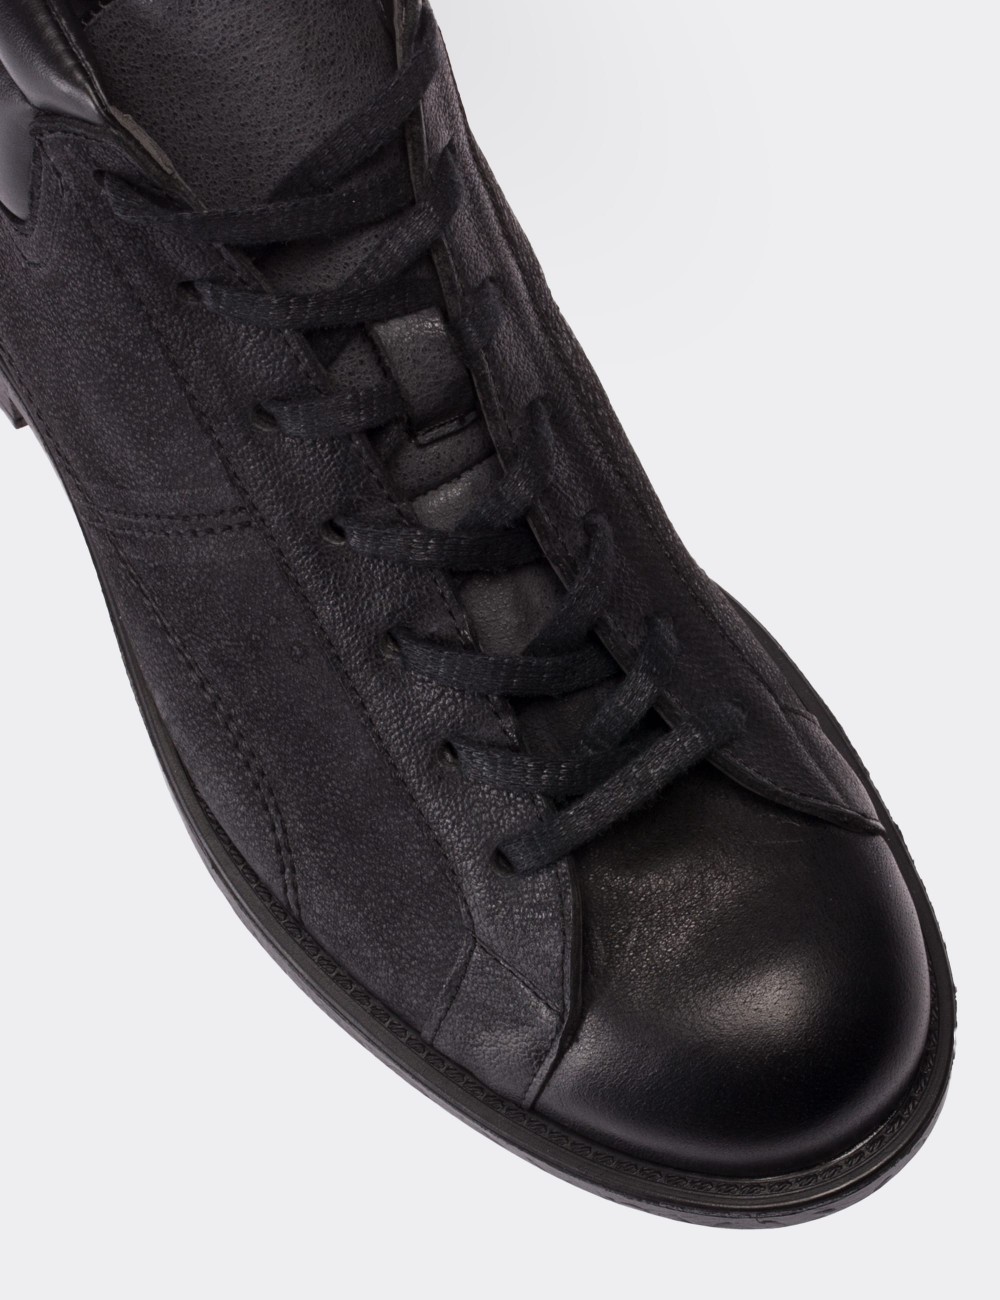 Black  Leather Boots - 01760MSYHC02